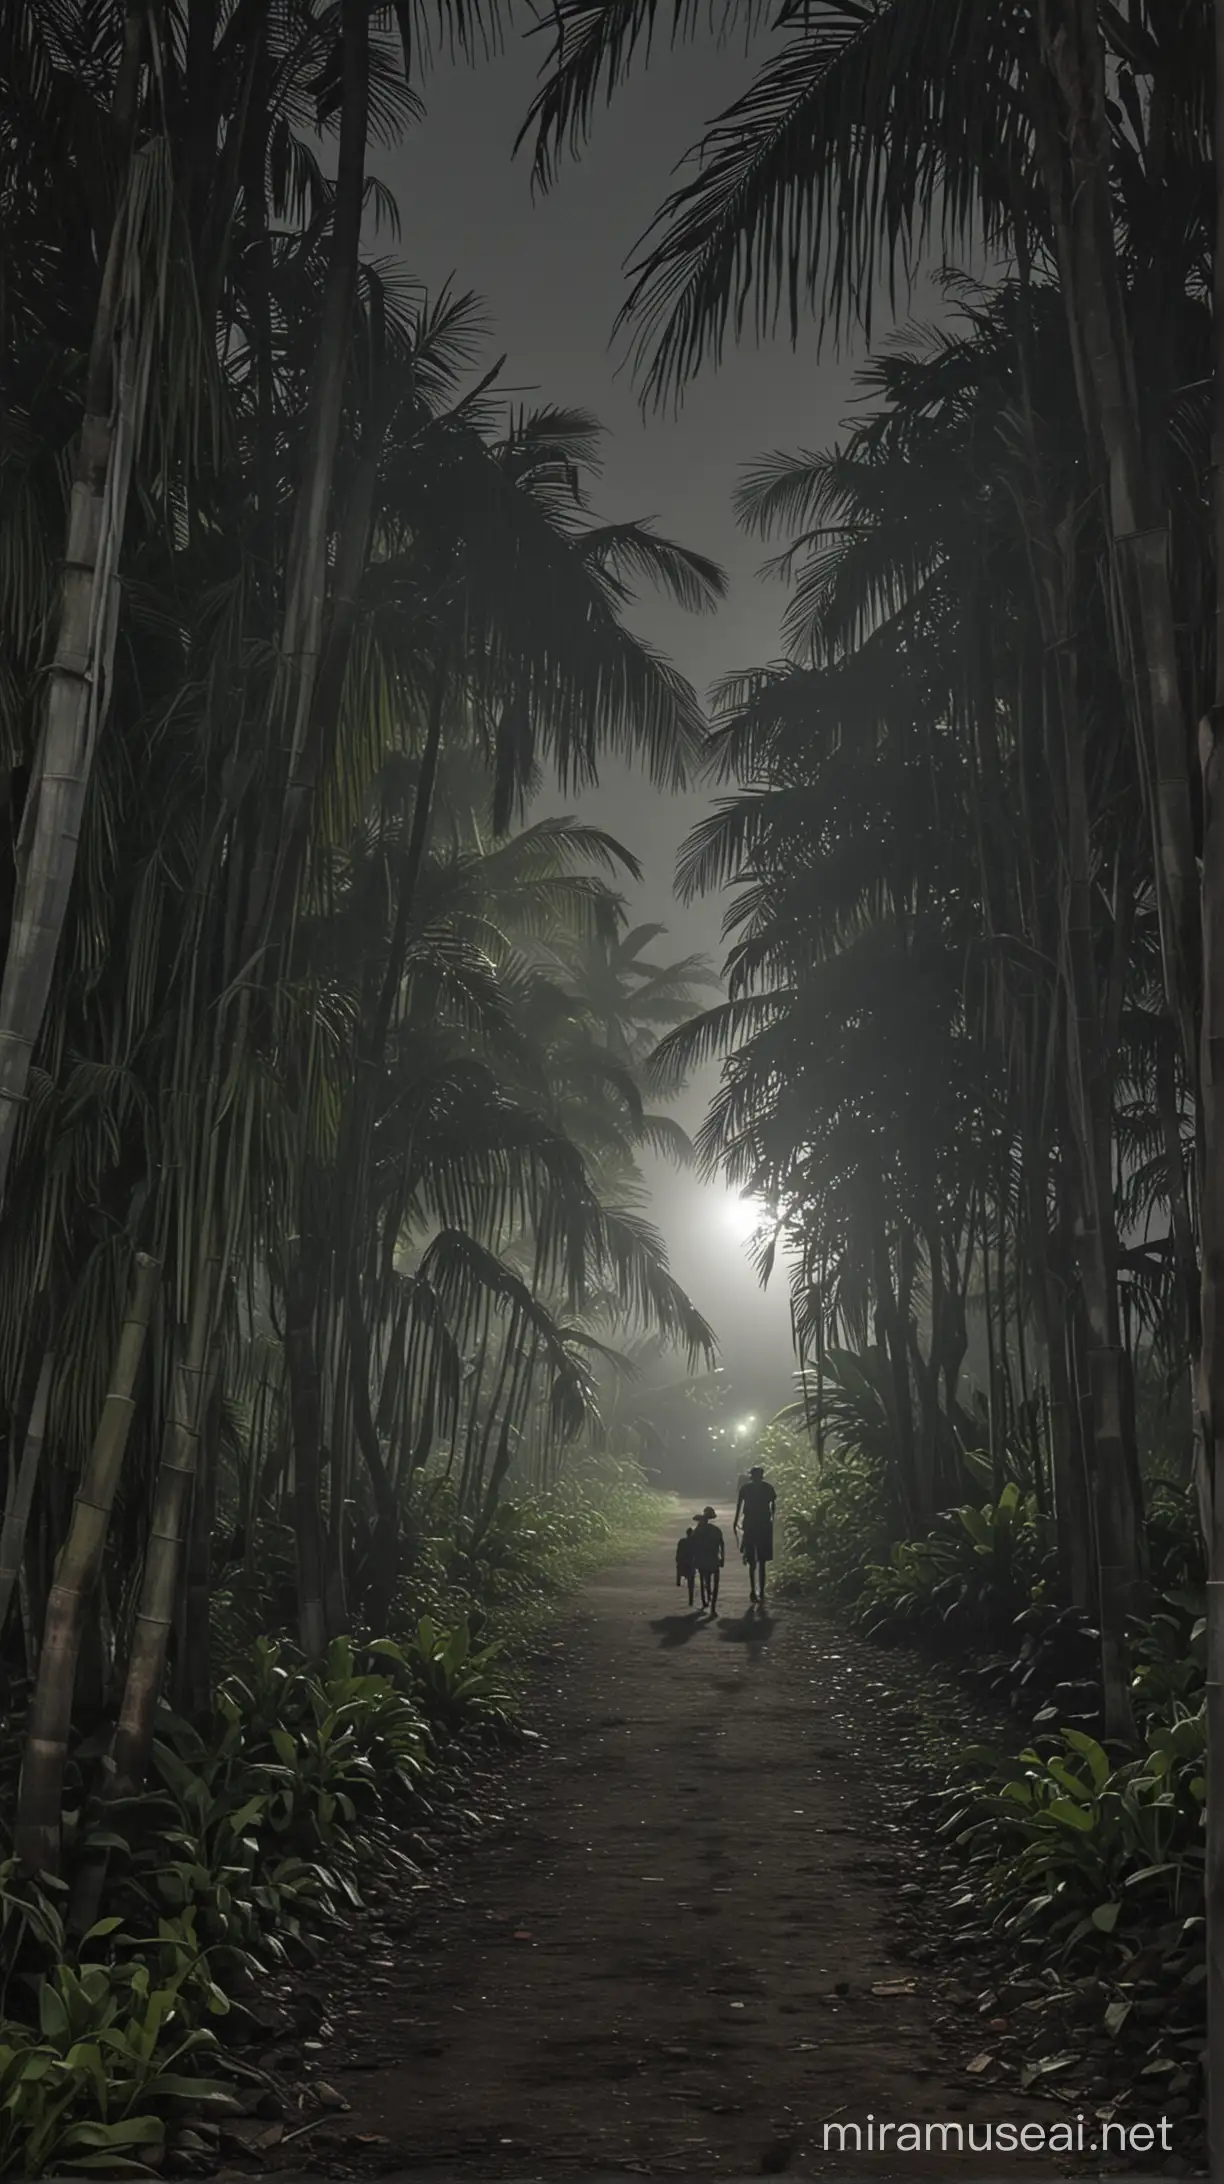 Eerie Night Walk in Indonesian Village with Banana Trees